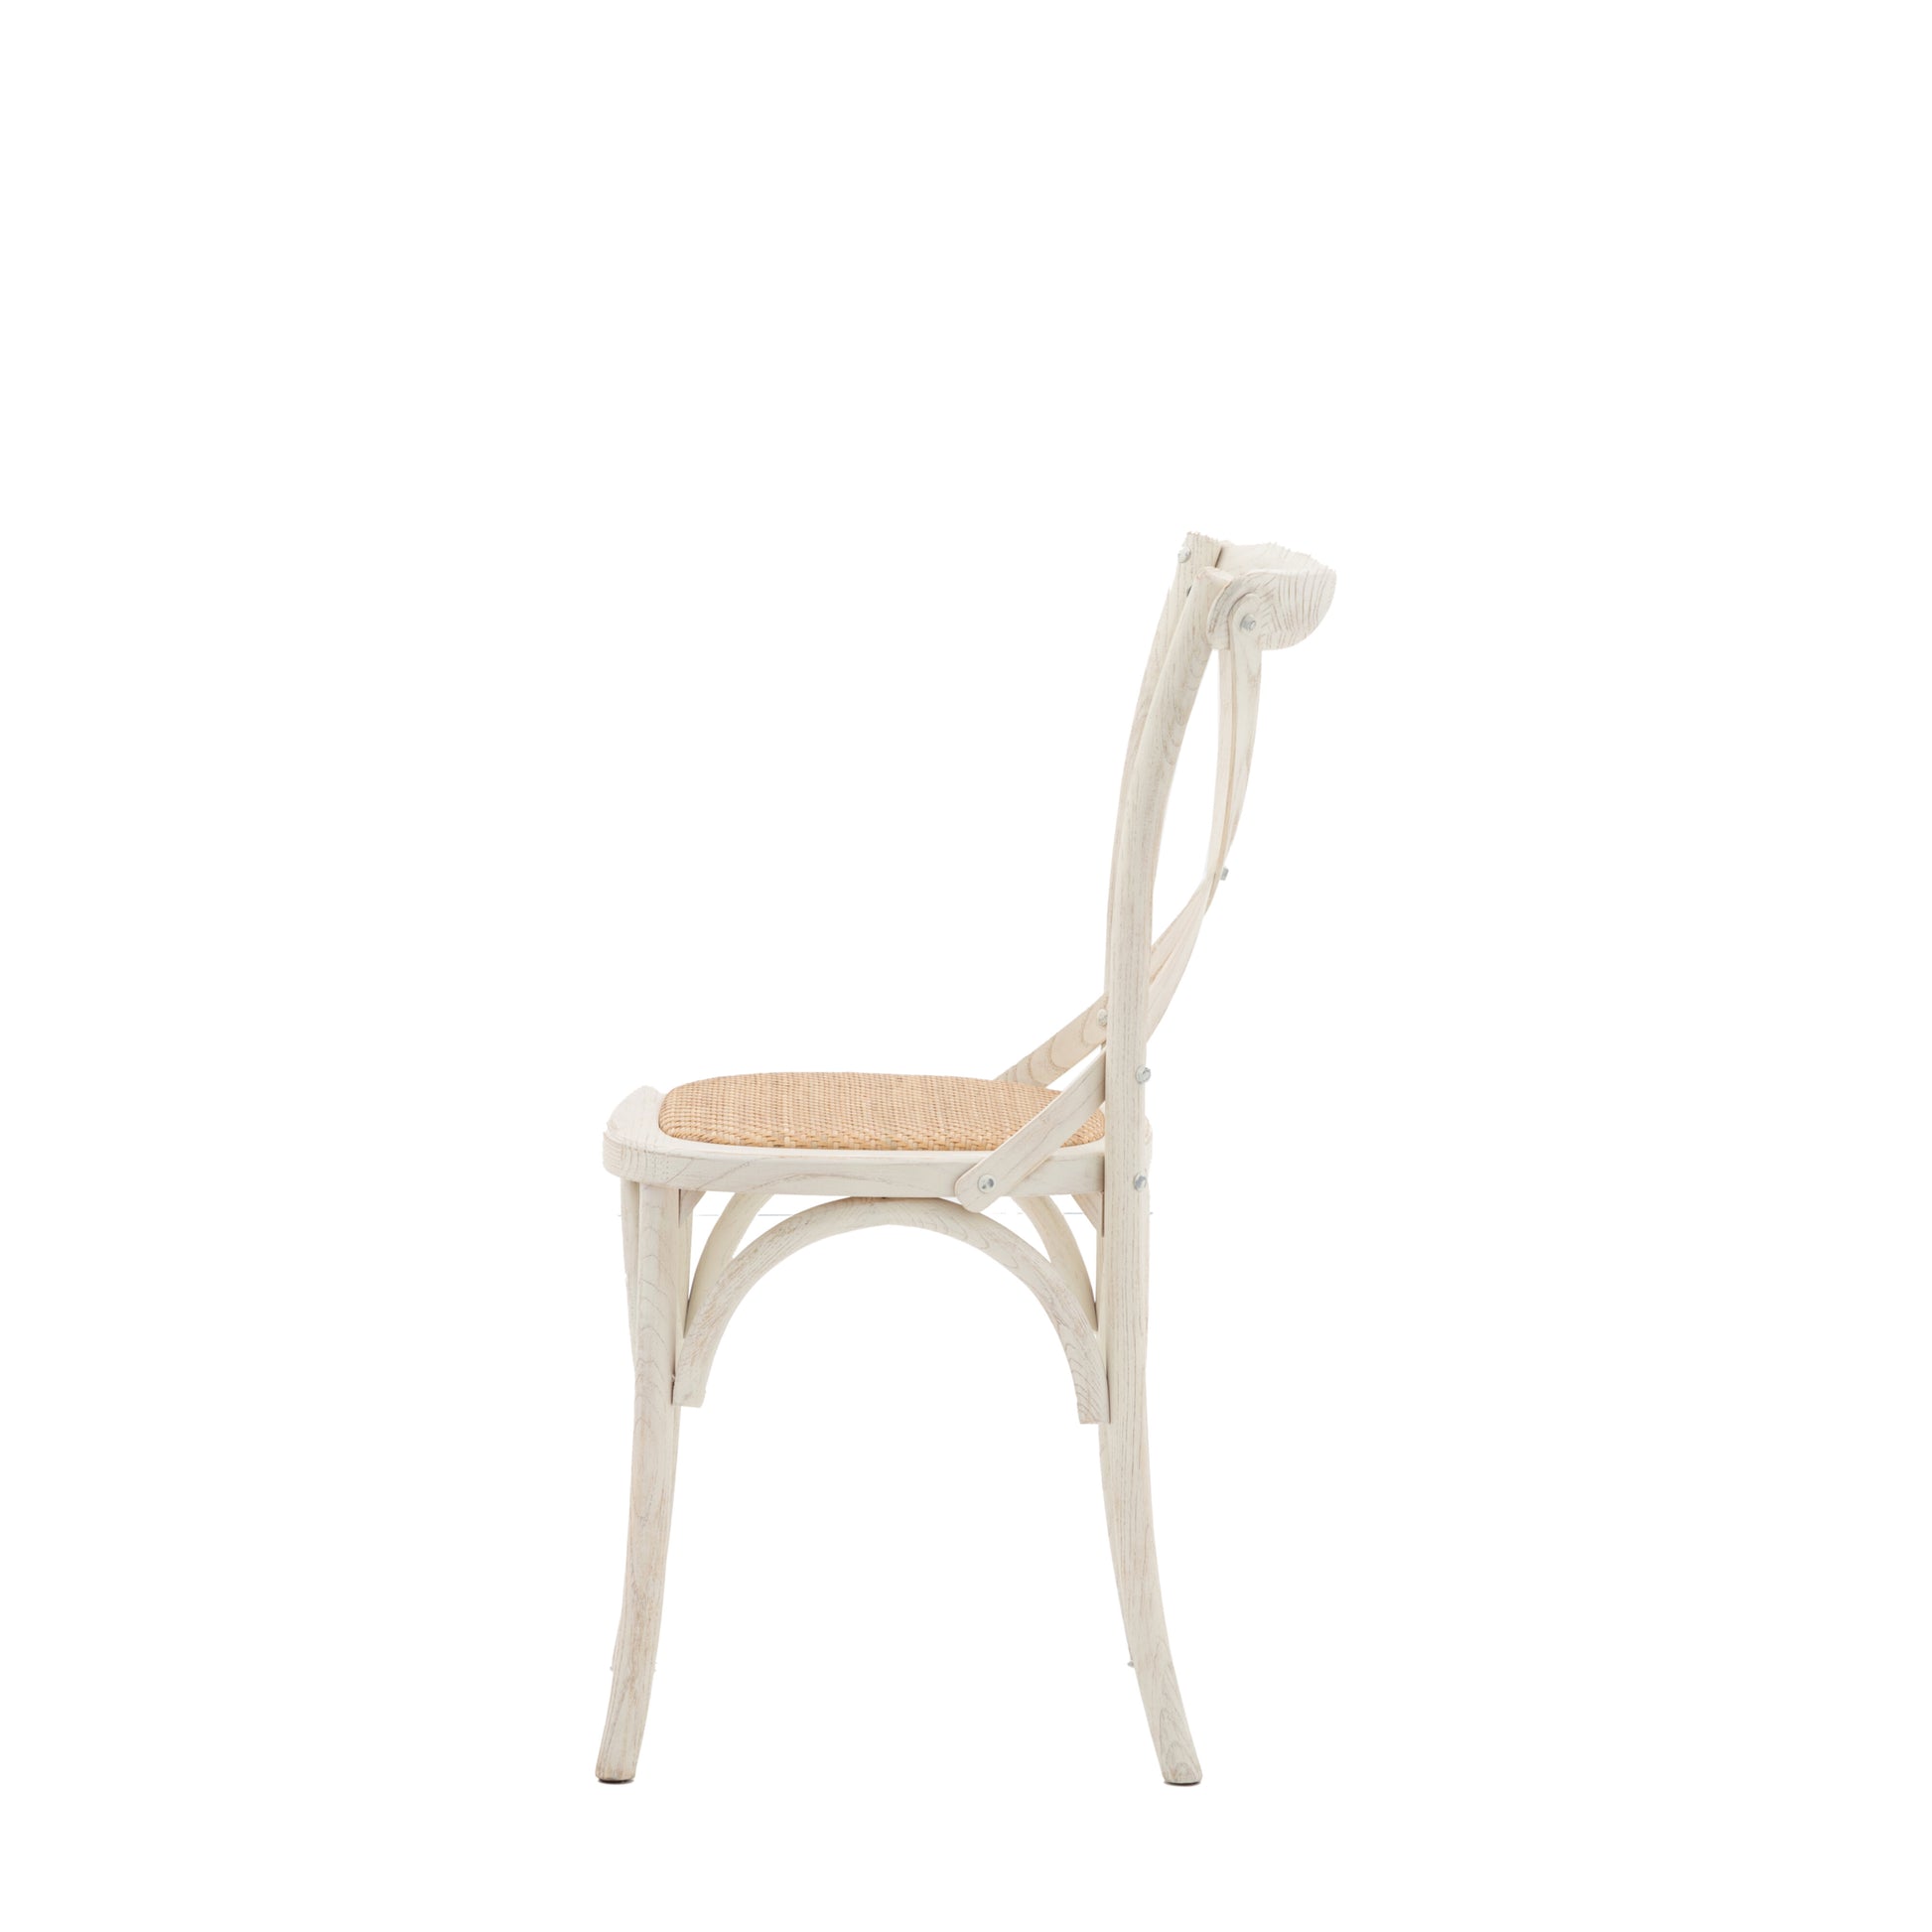 Wooden X Back Dining Chair | White/Rattan (2 Pack)